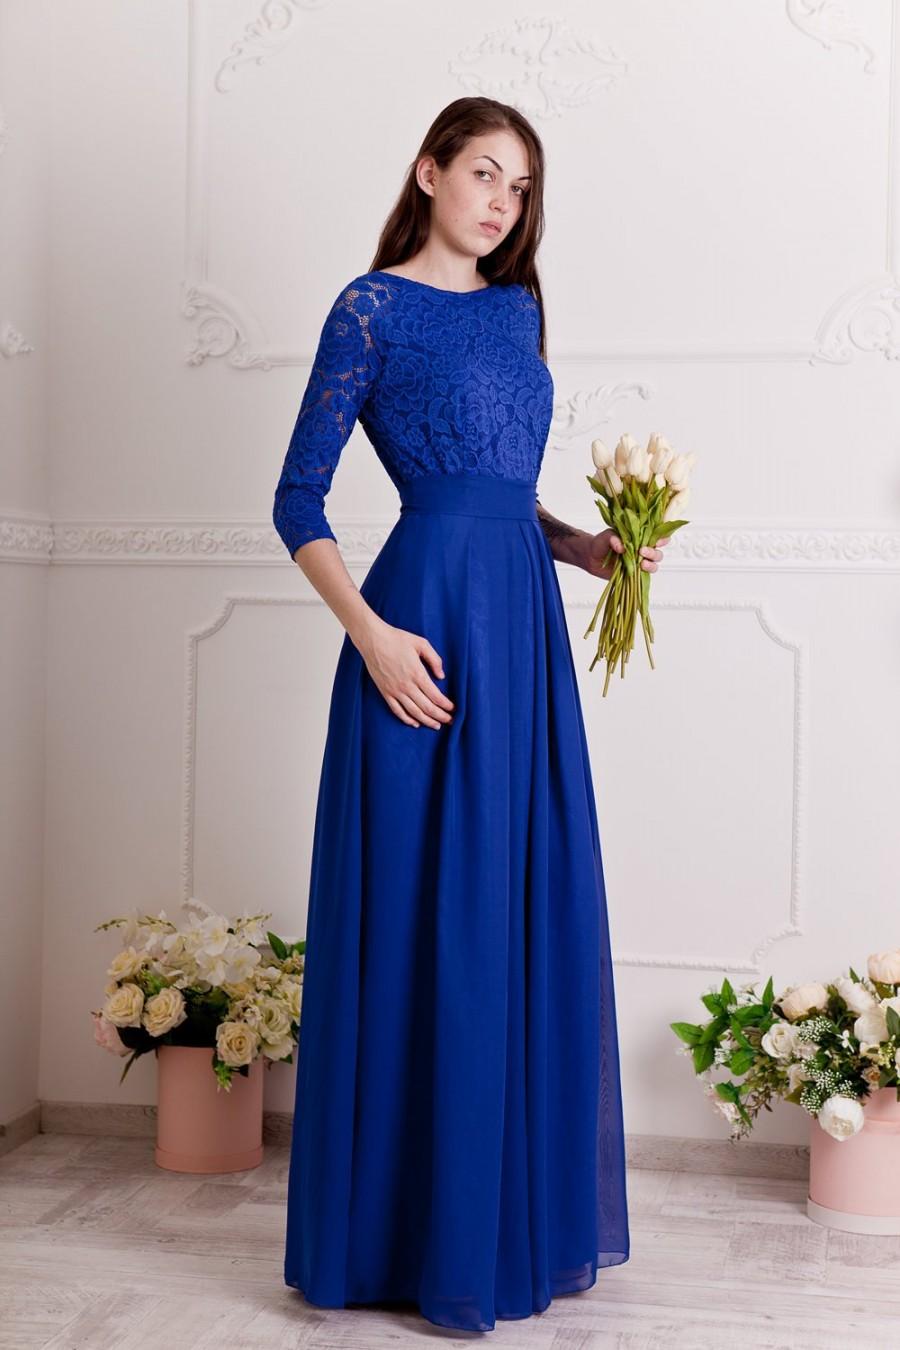 Hochzeit - Cobalt blue bridesmaid dress long. Floral lace formal gown with sleeves. Modest evening dress plus size.Blue mother of the groom dress